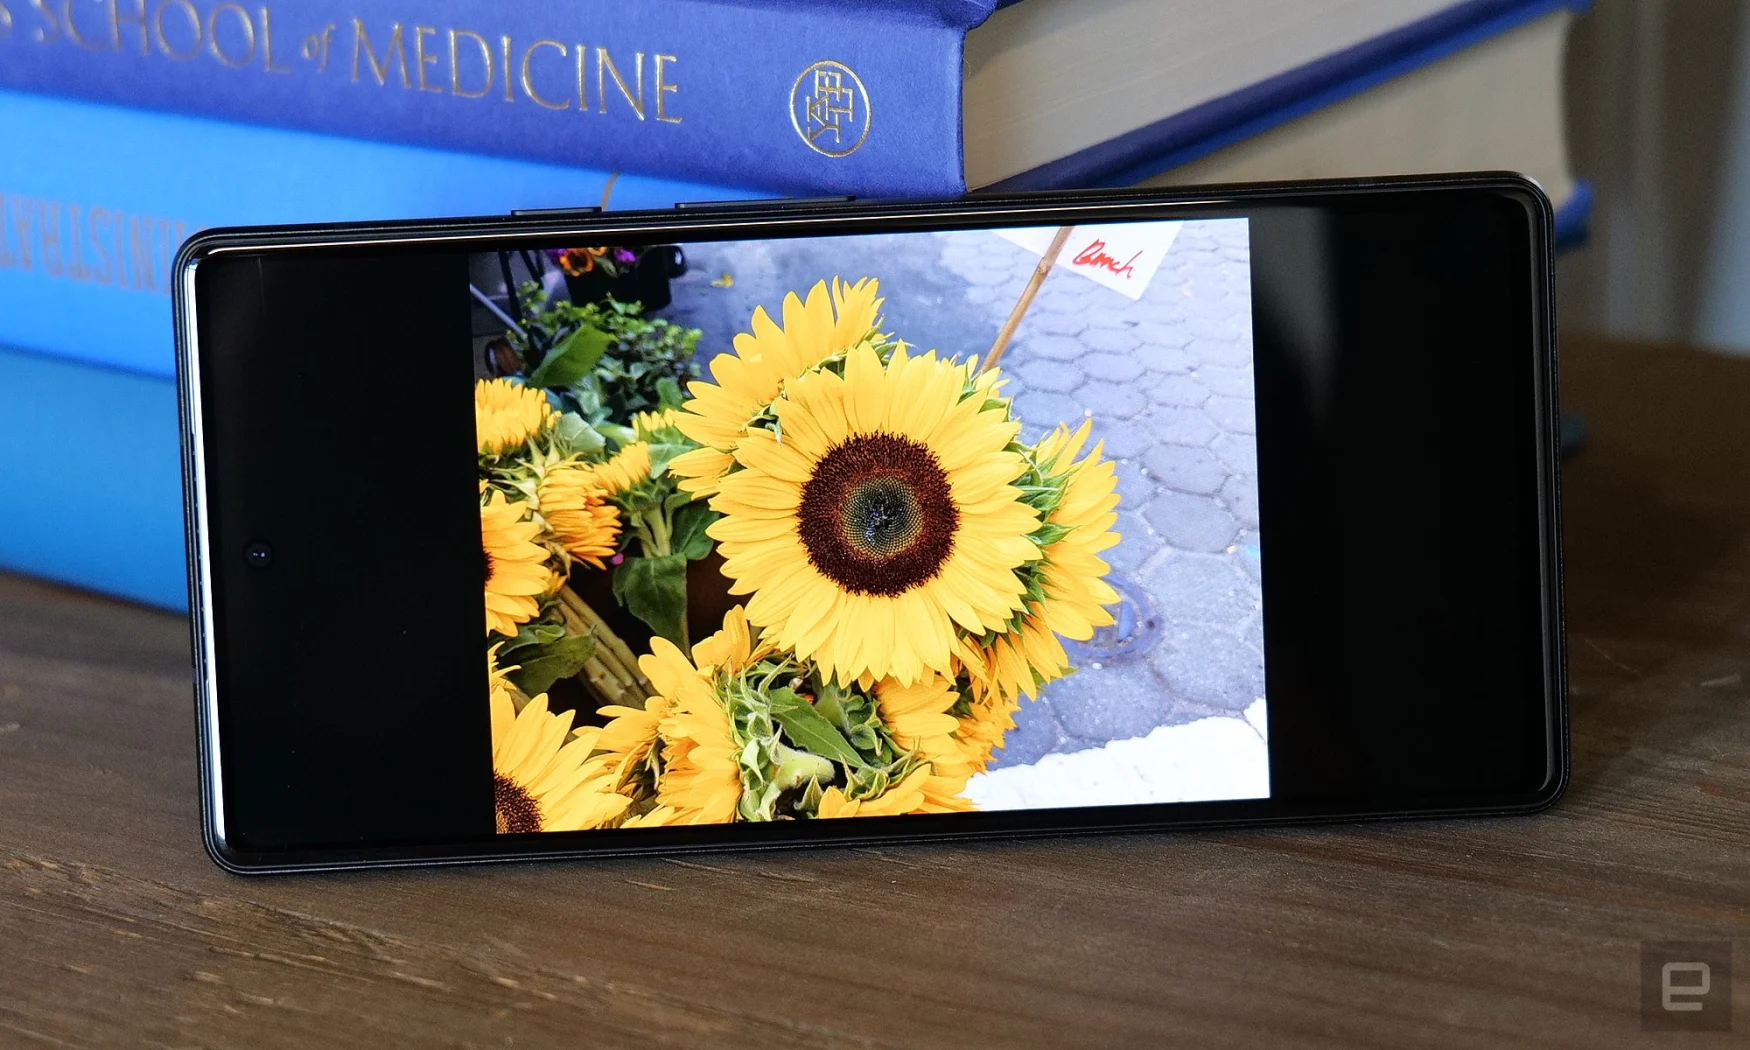 The Pixel 6a leaning against some books with its screen facing the camera. On the display is a photo of a bunch of yellow sunflowers.